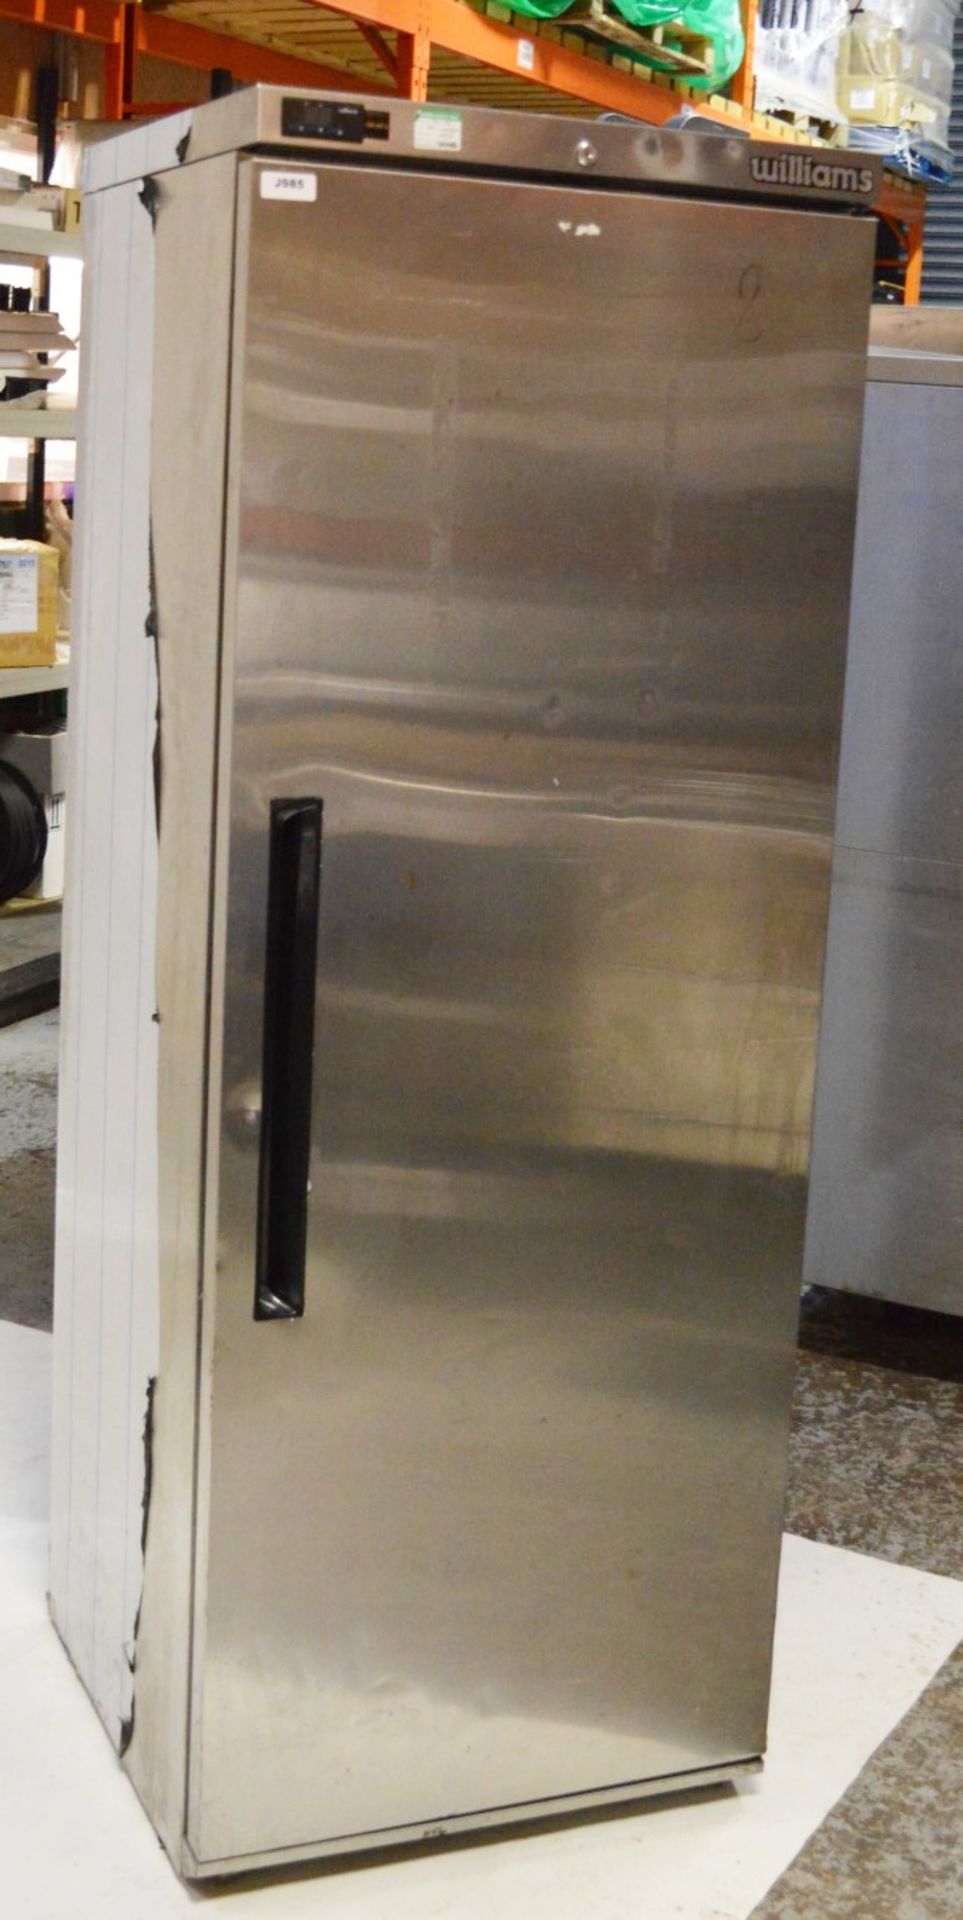 1 x Williams Upright Stainless Steel Commercial Freezer - Model LA400SS - CL290 - Ref J985 - H177